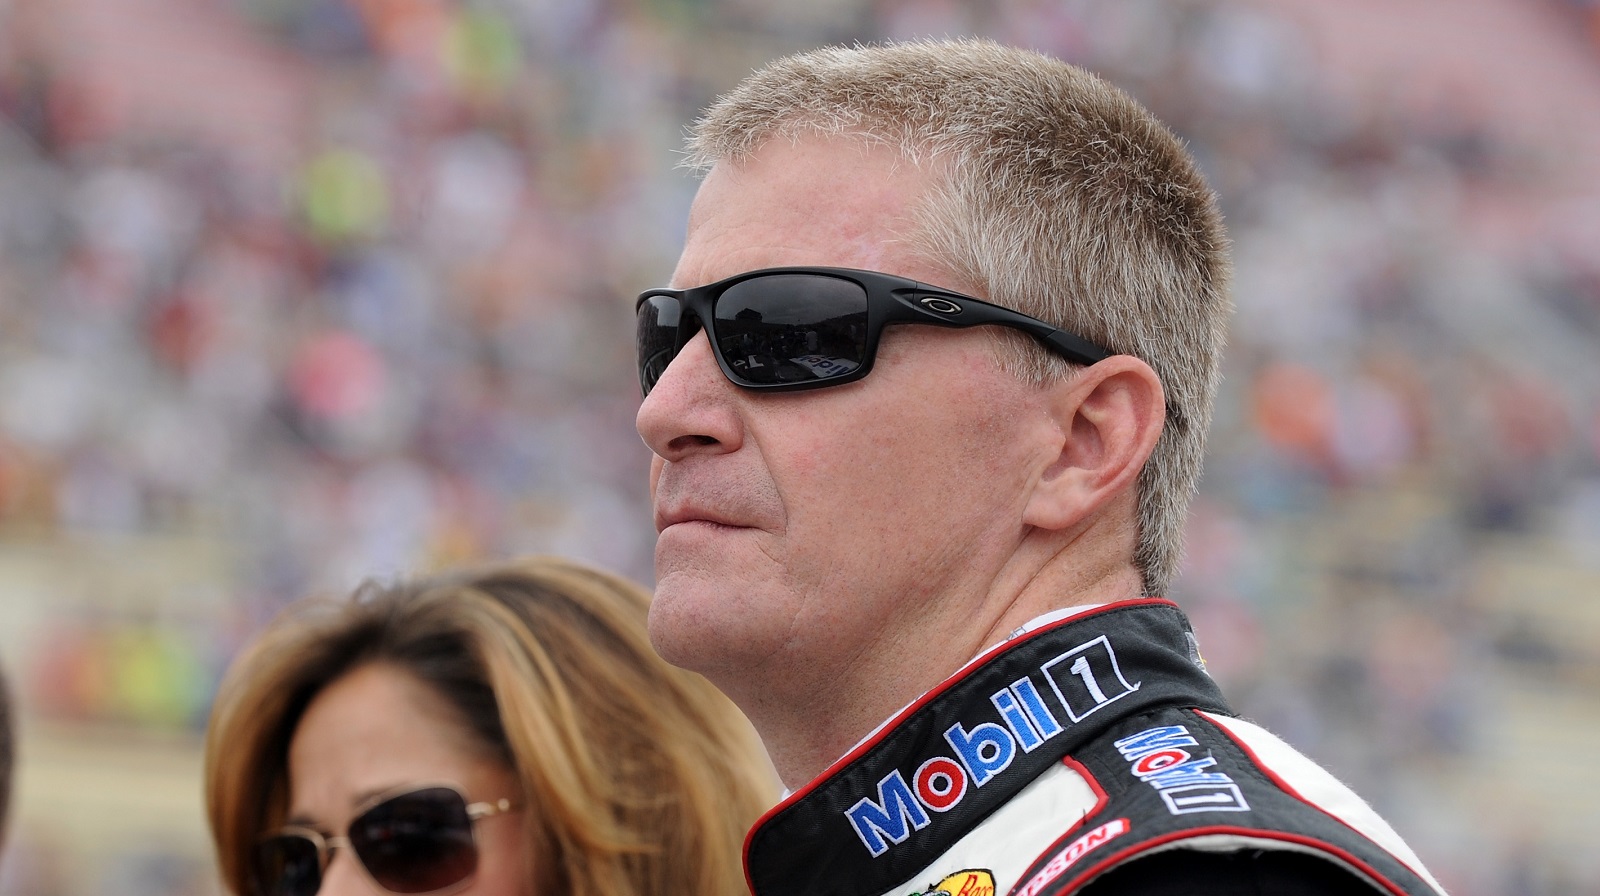 Jeff Burton stands on the grid prior to the NASCAR Sprint Cup Series Pure Michigan 400 at Michigan International Speedway on Aug. 17, 2014. | Robert Reiners/Getty Images